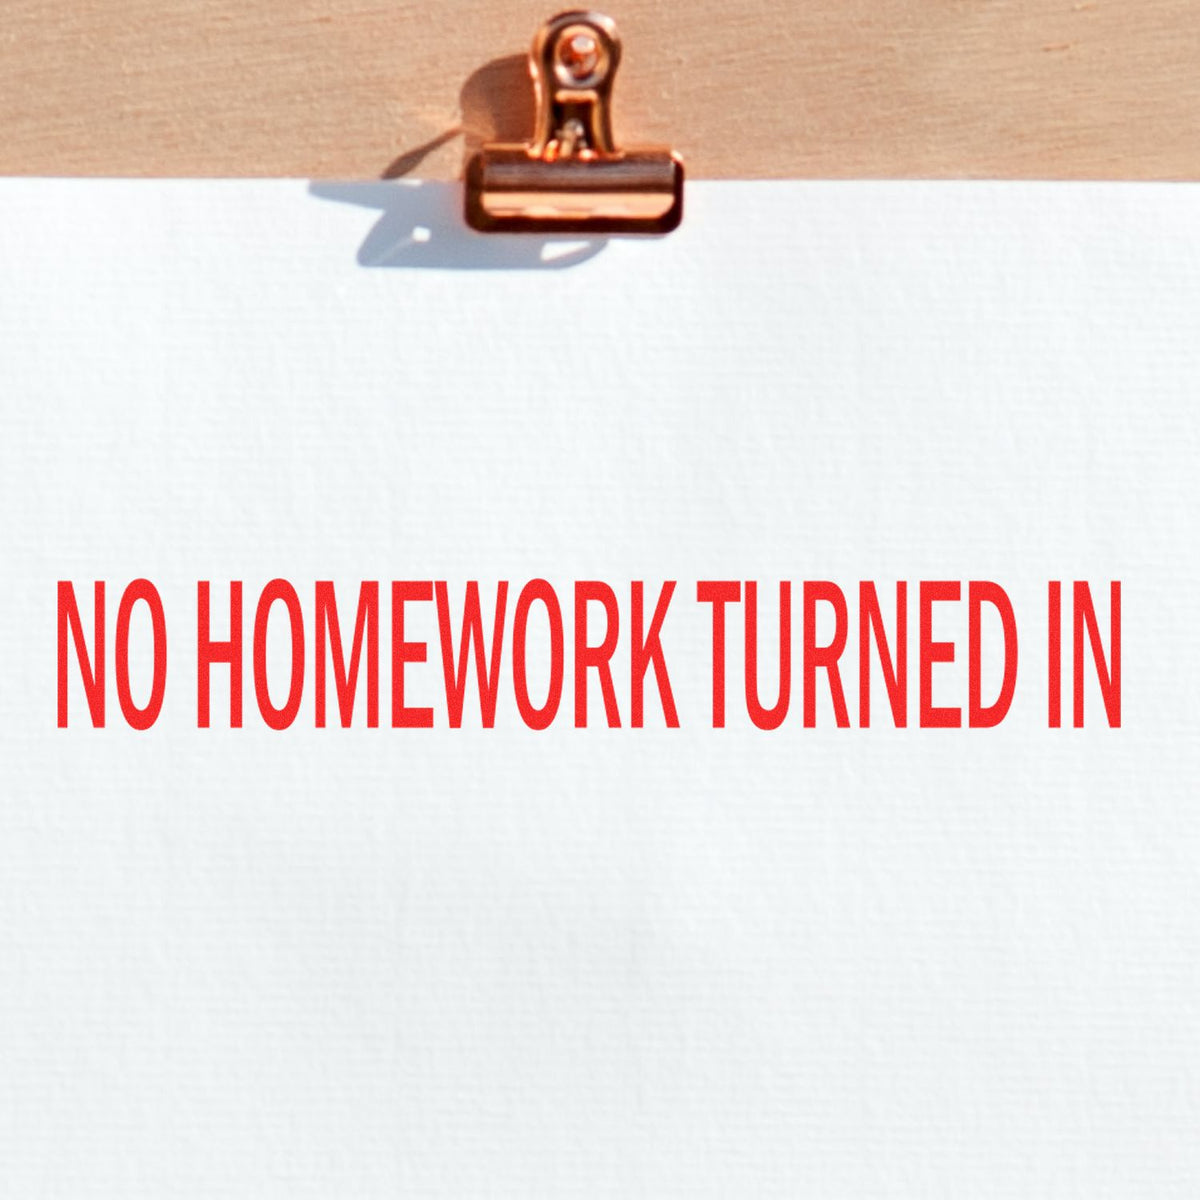 No Homework Turned In Rubber Stamp In Use Photo